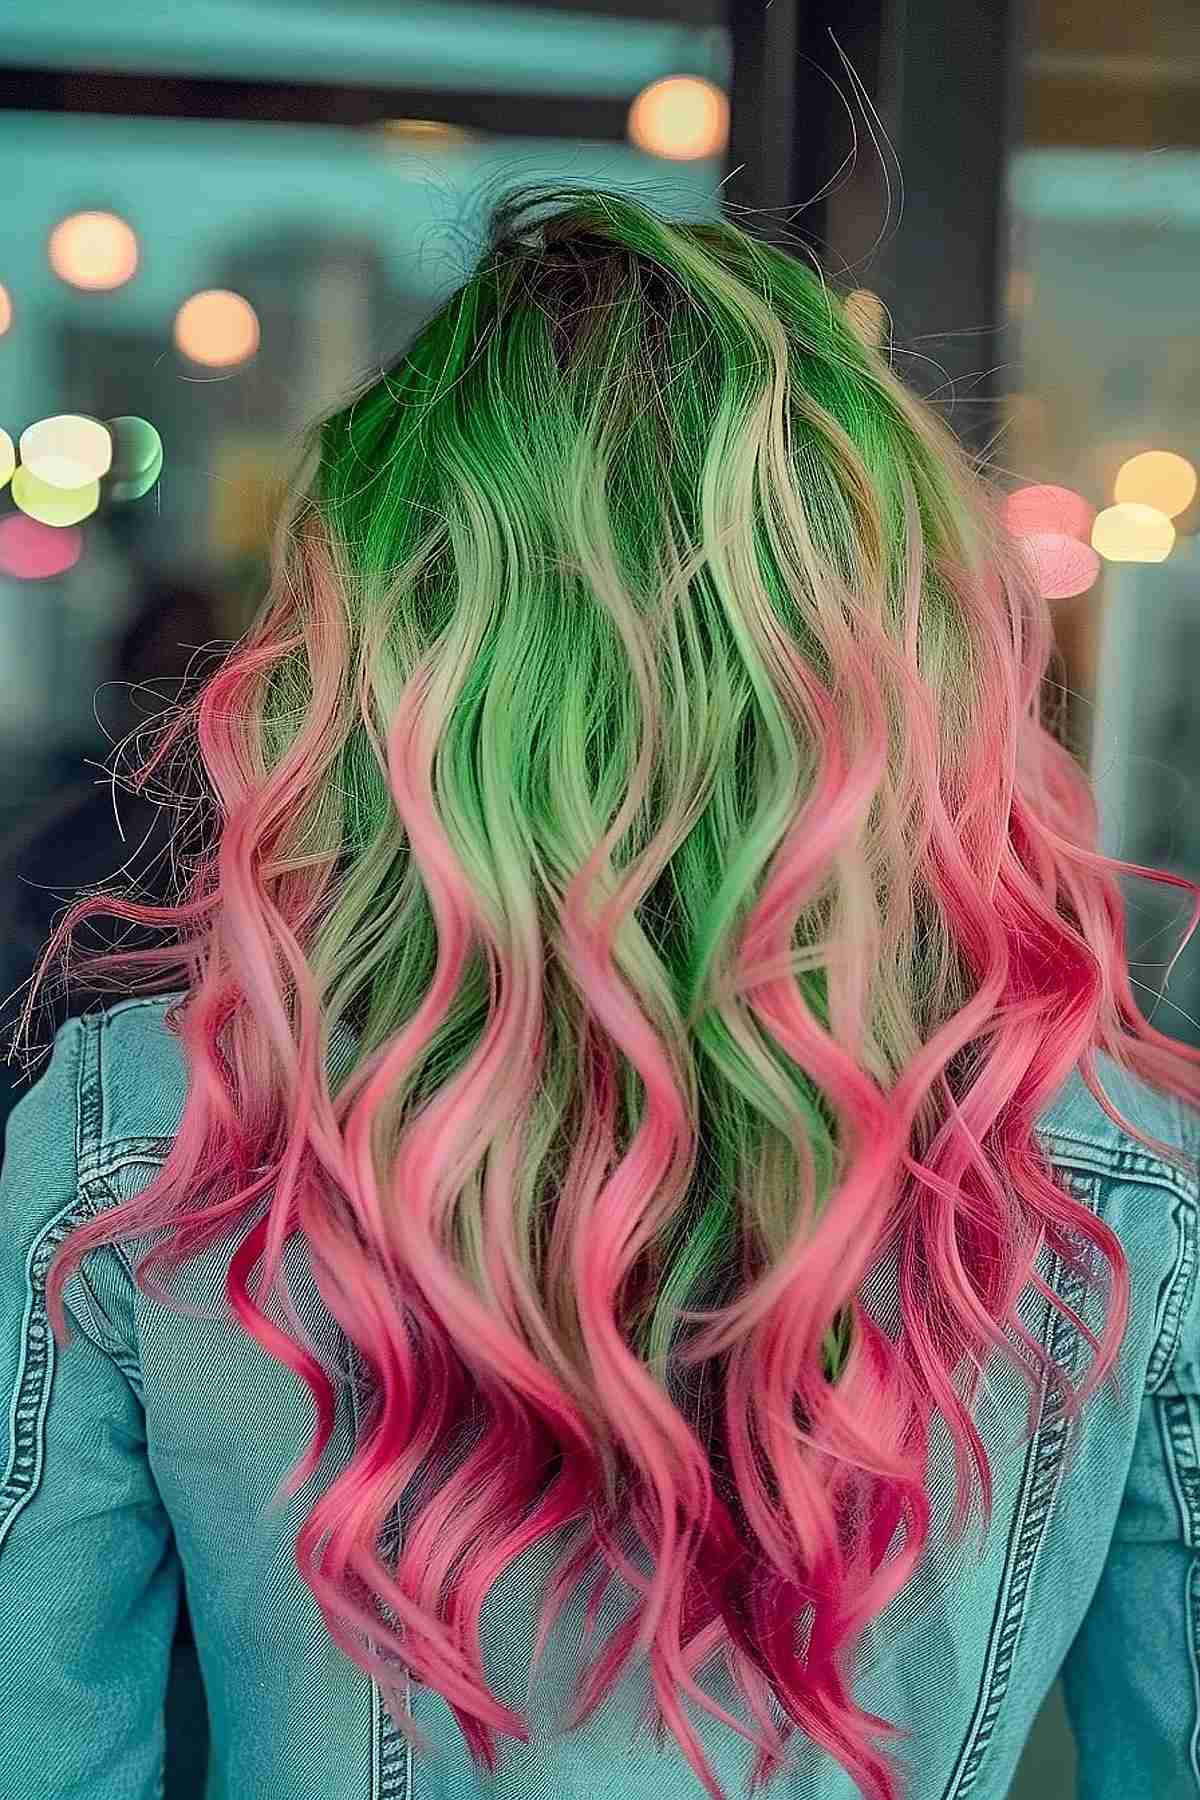 Long, wavy hair with a subtle watermelon balayage, transitioning from vivid pink at the top to lively green at the tips.